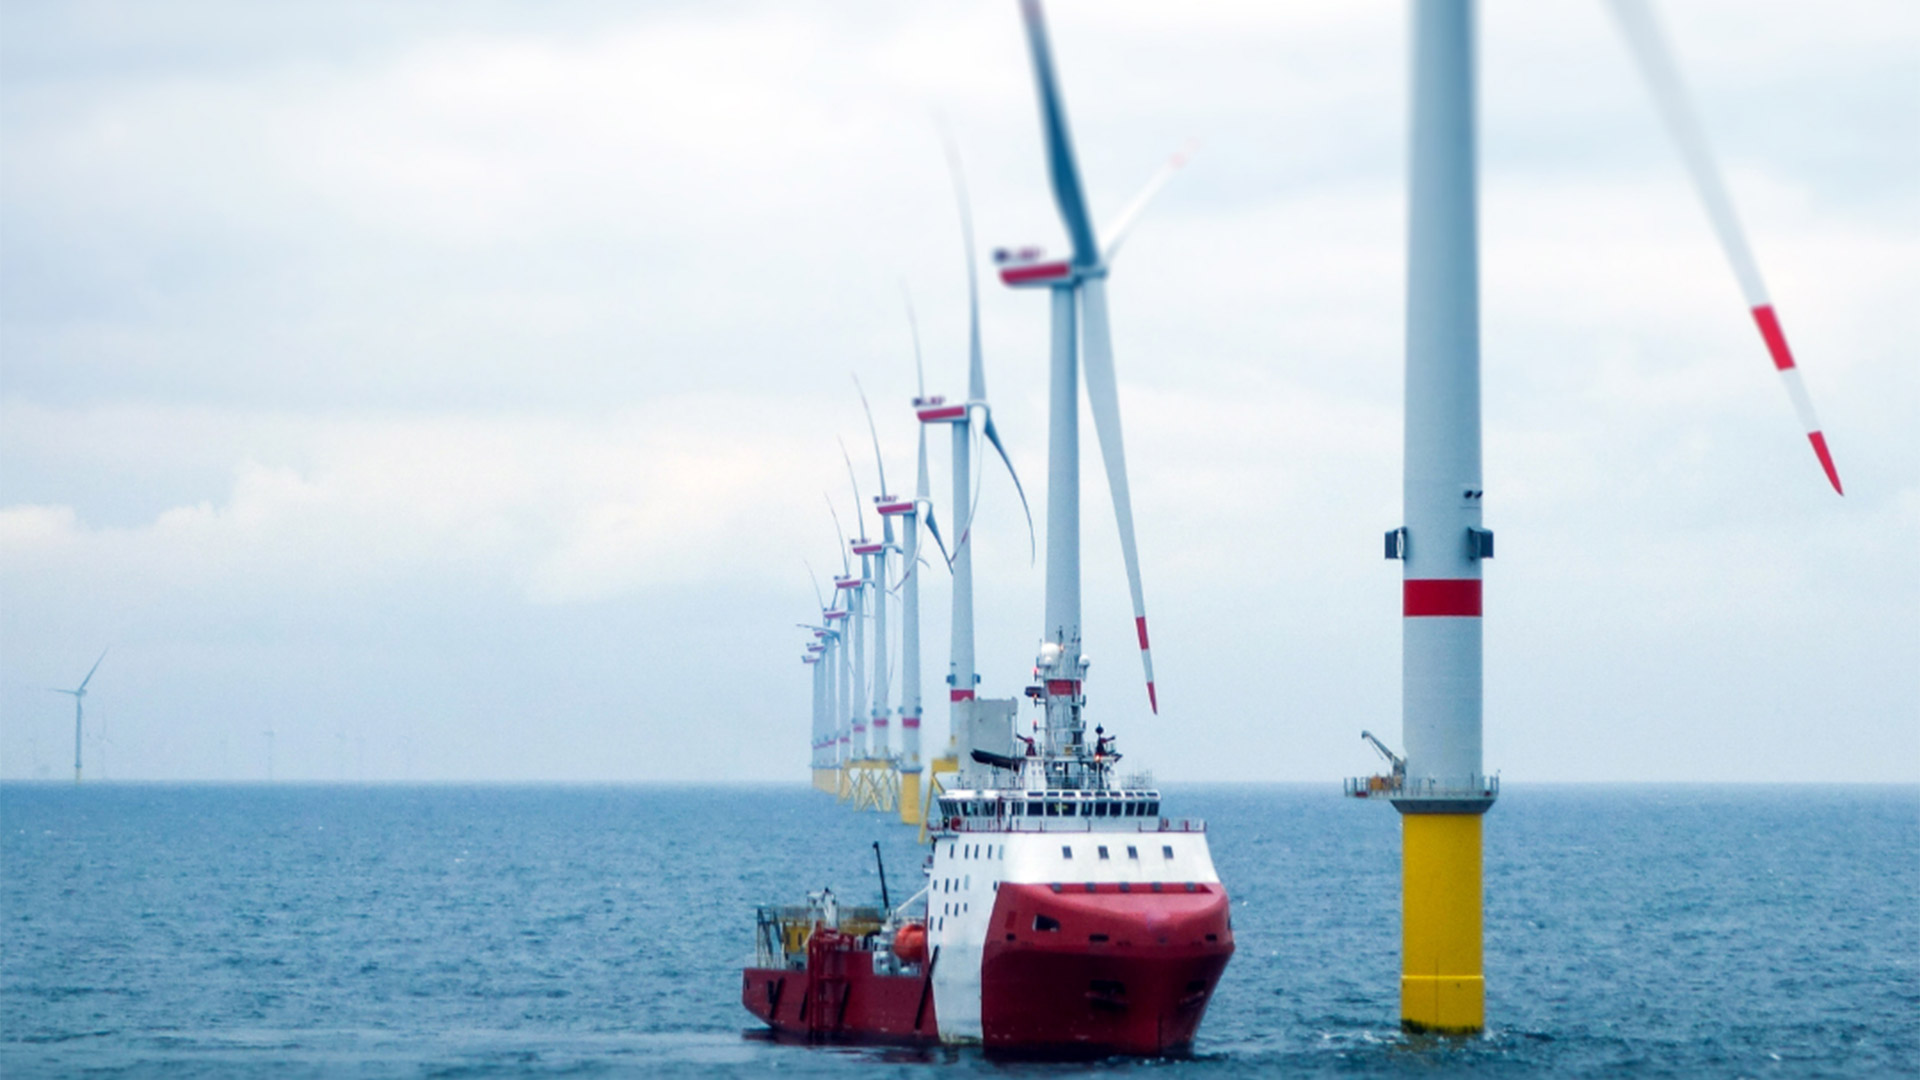 Ship passing wind turbines in the ocean